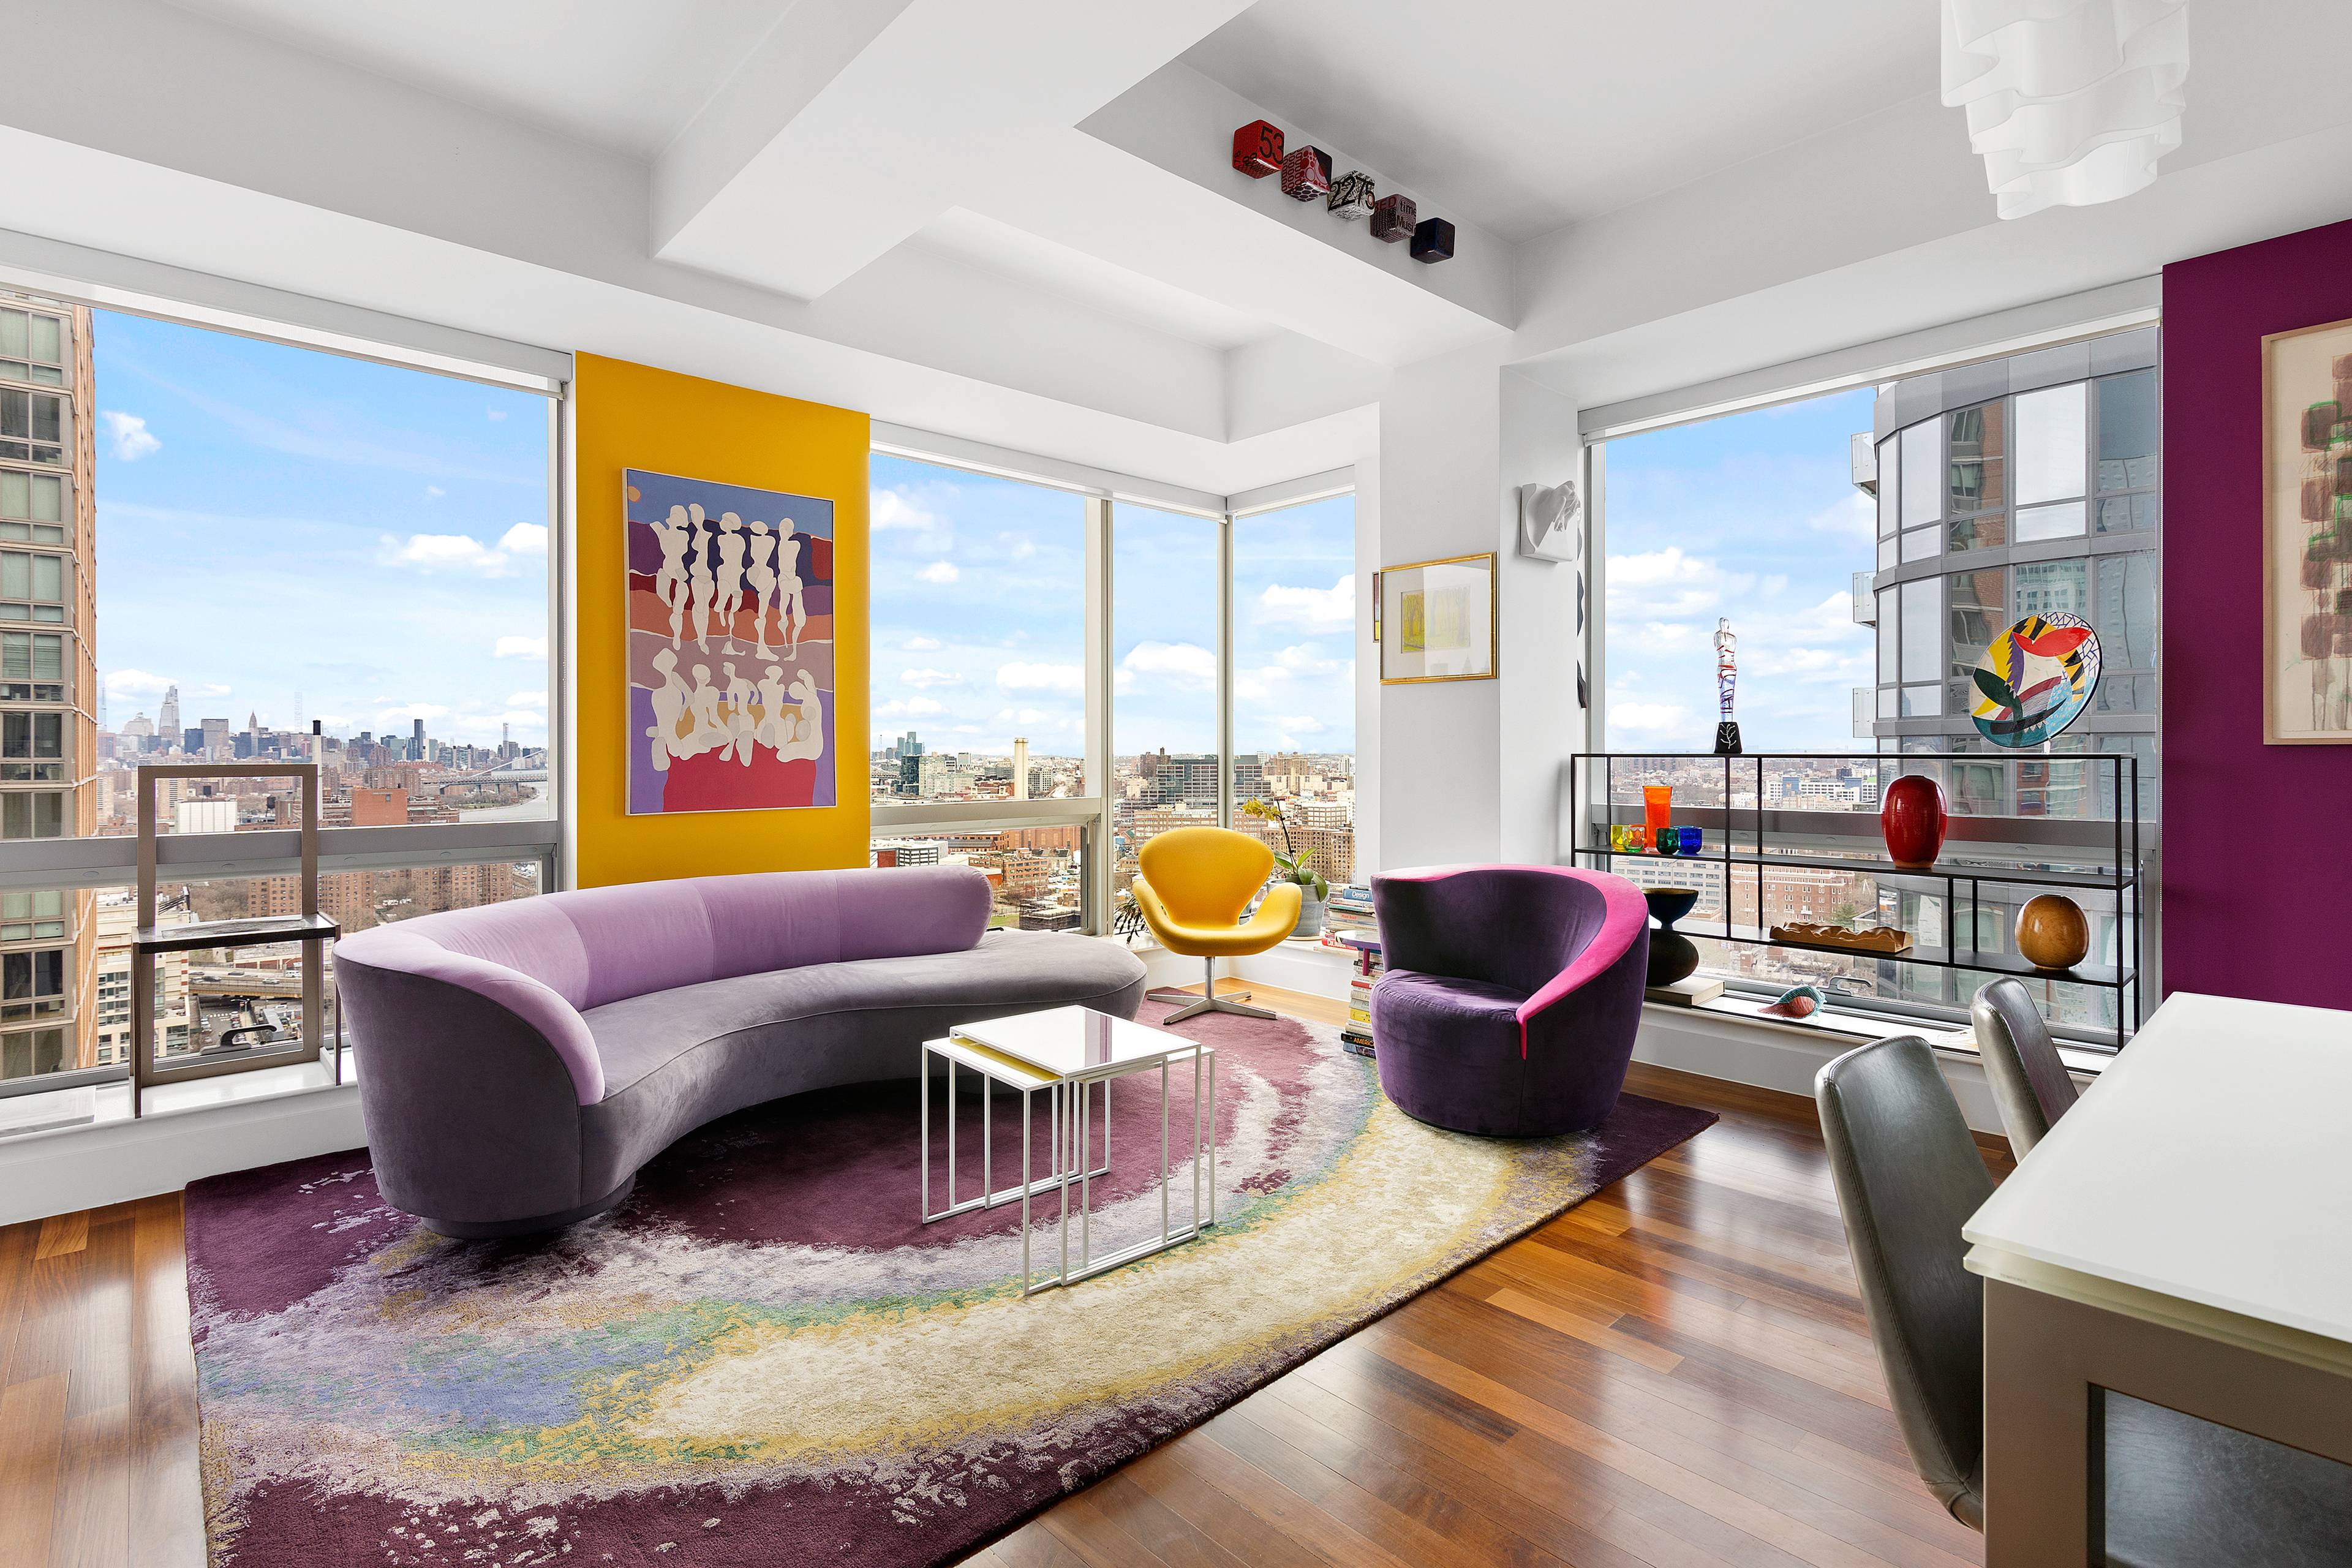 Residence 2401 at the Toren Condominium is a sprawling split two bedroom two bath with the most breathtakingly intimate Manhattan views from a wall of nearly uninterrupted floor to ceiling ...